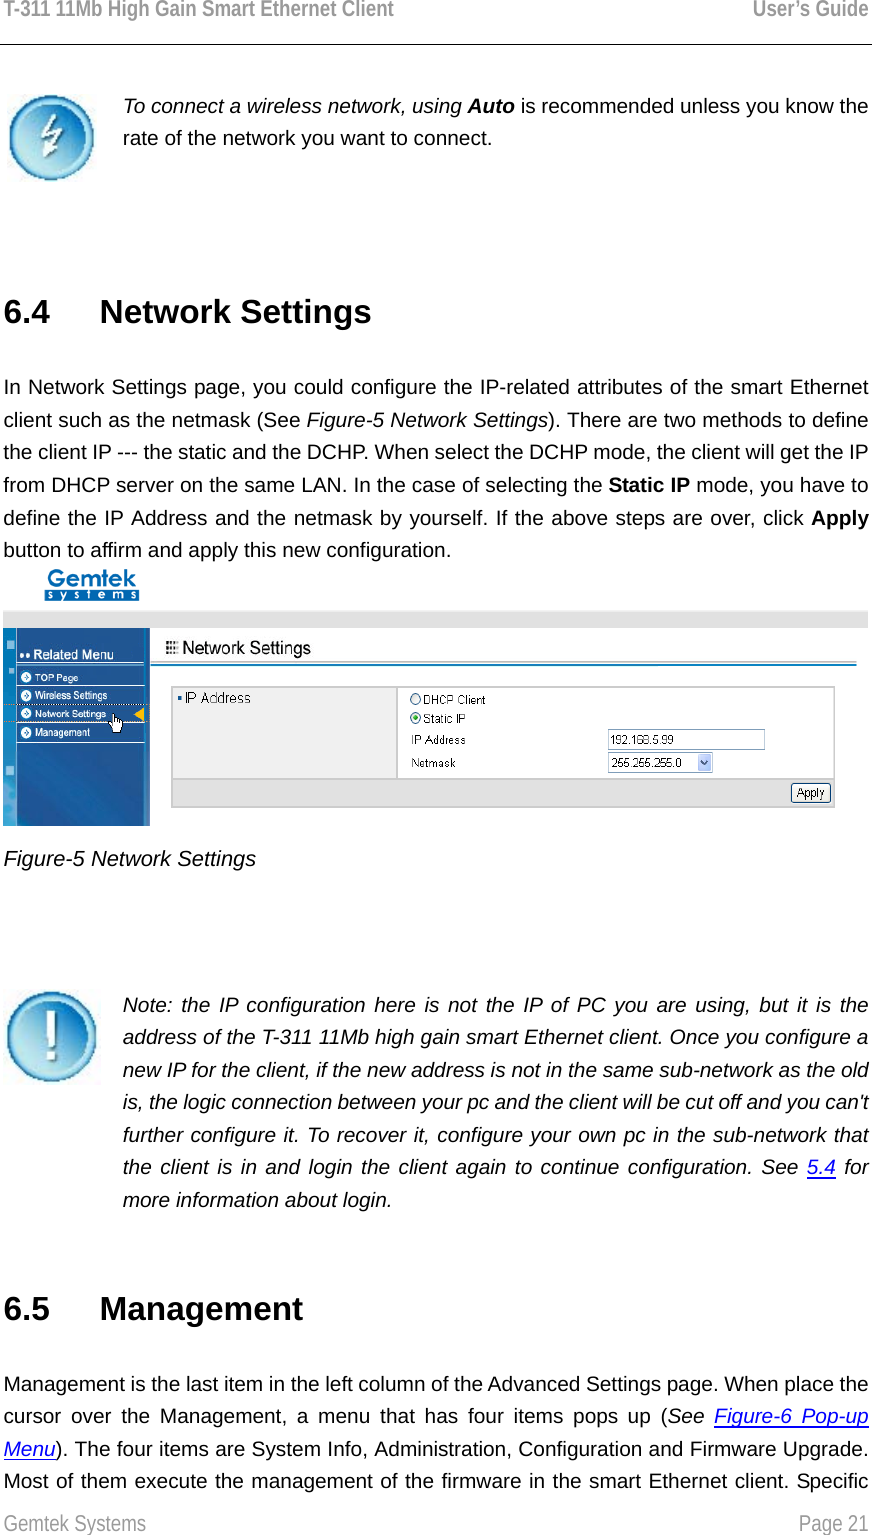 T-311 11Mb High Gain Smart Ethernet Client    User’s Guide  Gemtek Systems    Page 21   To connect a wireless network, using Auto is recommended unless you know the rate of the network you want to connect.  6.4   Network Settings In Network Settings page, you could configure the IP-related attributes of the smart Ethernet client such as the netmask (See Figure-5 Network Settings). There are two methods to define the client IP --- the static and the DCHP. When select the DCHP mode, the client will get the IP from DHCP server on the same LAN. In the case of selecting the Static IP mode, you have to define the IP Address and the netmask by yourself. If the above steps are over, click Apply button to affirm and apply this new configuration.  Figure-5 Network Settings    Note: the IP configuration here is not the IP of PC you are using, but it is the address of the T-311 11Mb high gain smart Ethernet client. Once you configure a new IP for the client, if the new address is not in the same sub-network as the old is, the logic connection between your pc and the client will be cut off and you can&apos;t further configure it. To recover it, configure your own pc in the sub-network that the client is in and login the client again to continue configuration. See 5.4 for more information about login. 6.5   Management Management is the last item in the left column of the Advanced Settings page. When place the cursor over the Management, a menu that has four items pops up (See  Figure-6 Pop-up Menu). The four items are System Info, Administration, Configuration and Firmware Upgrade. Most of them execute the management of the firmware in the smart Ethernet client. Specific 